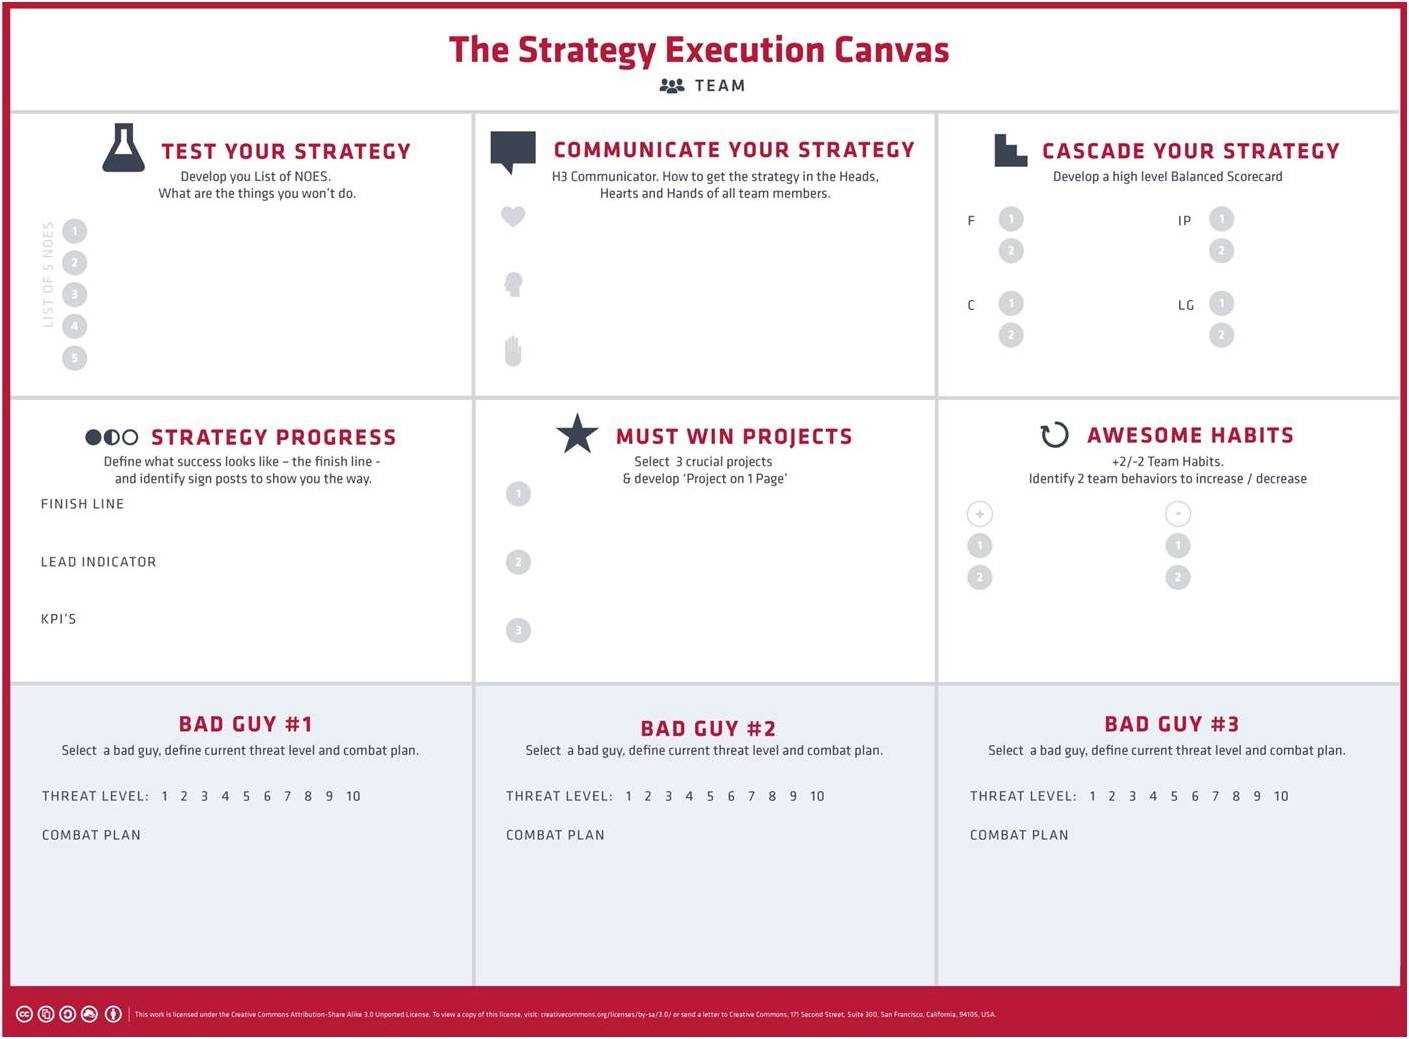 The Strategy Execution Canvas